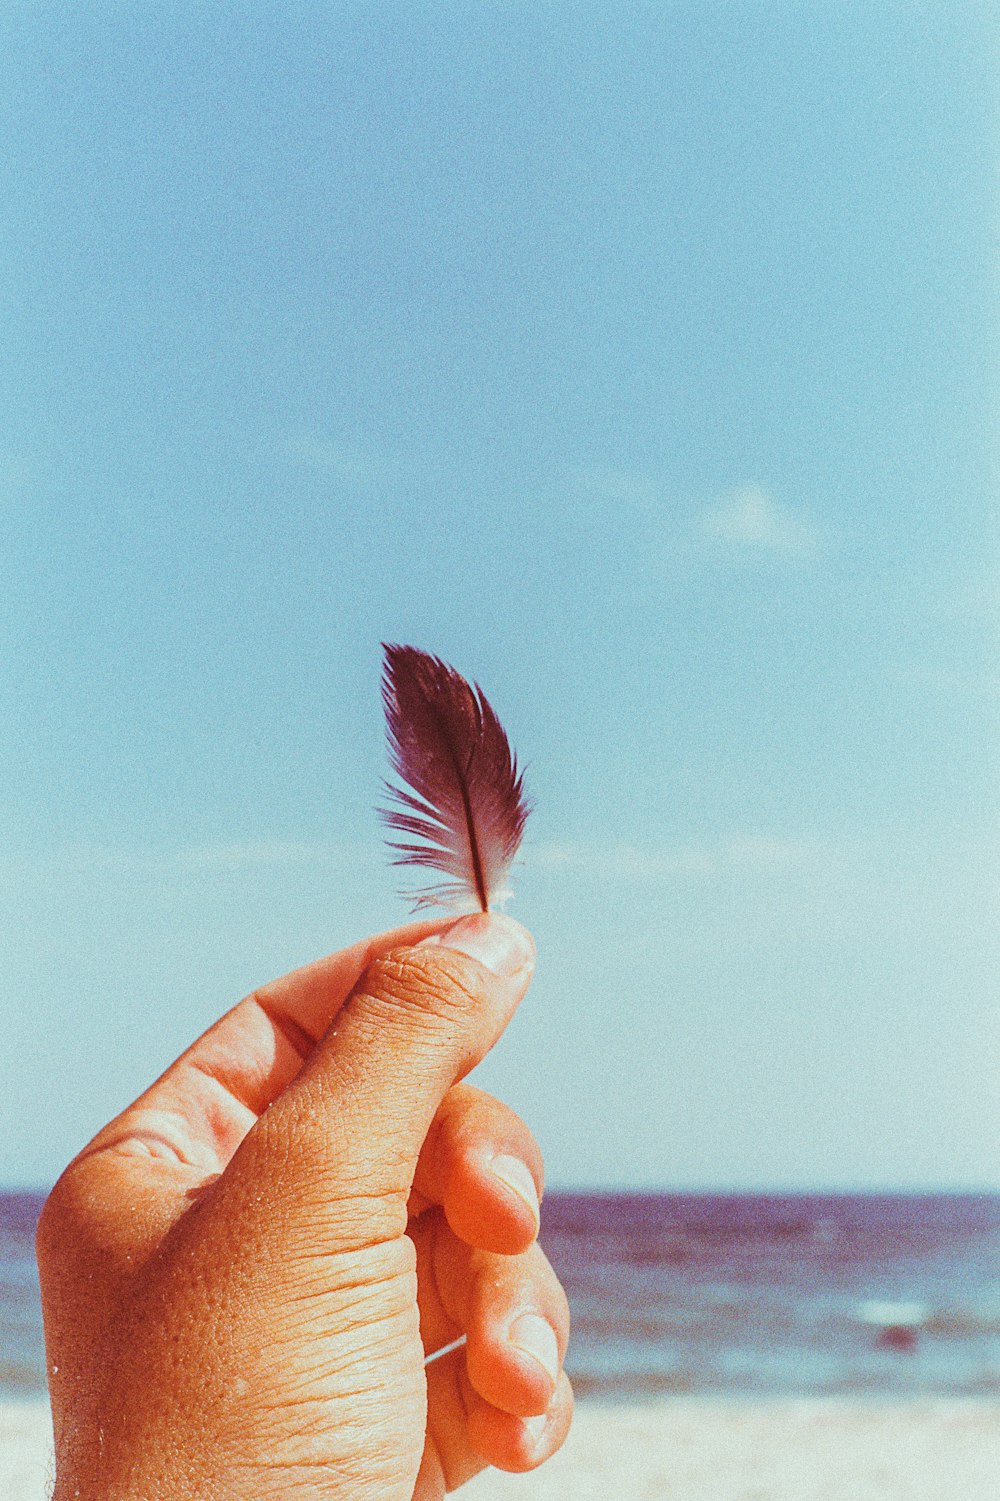 person holding black feather under blue sky during daytime